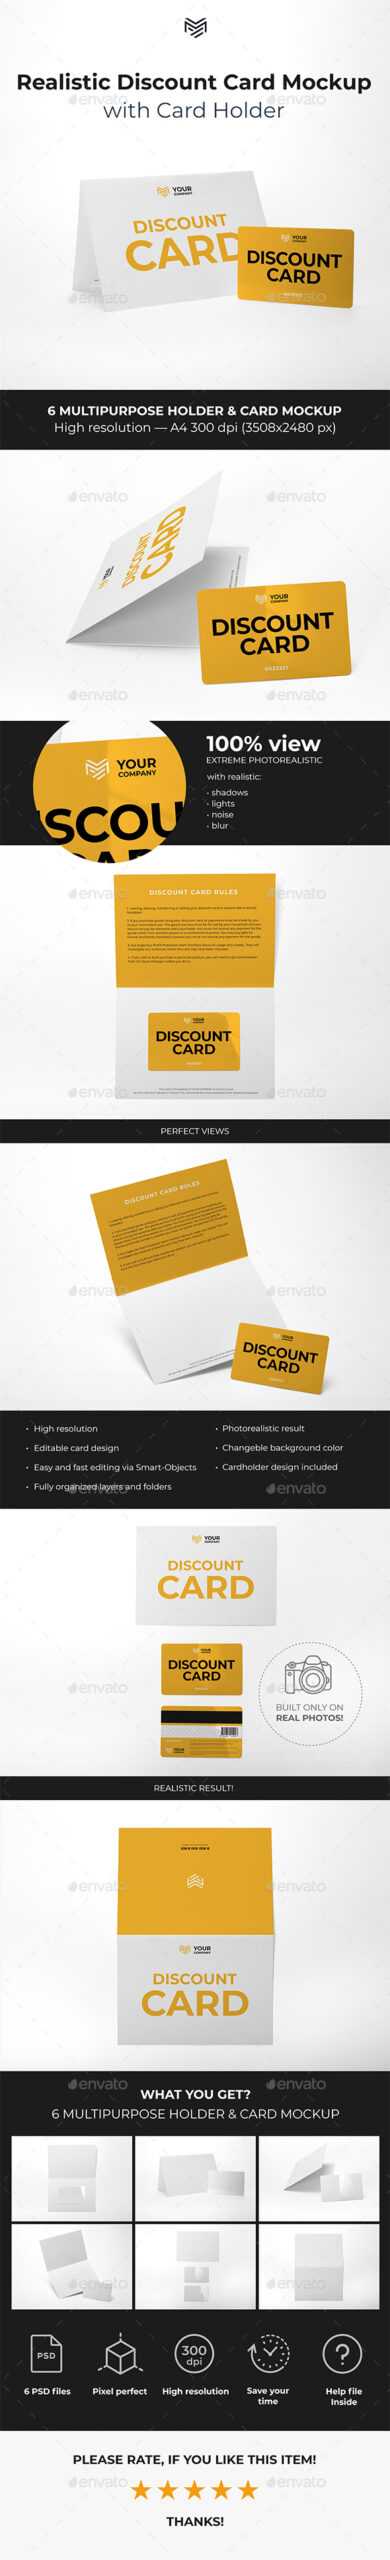 Hotel Key Card Graphics, Designs & Templates From Graphicriver Throughout Hotel Key Card Template